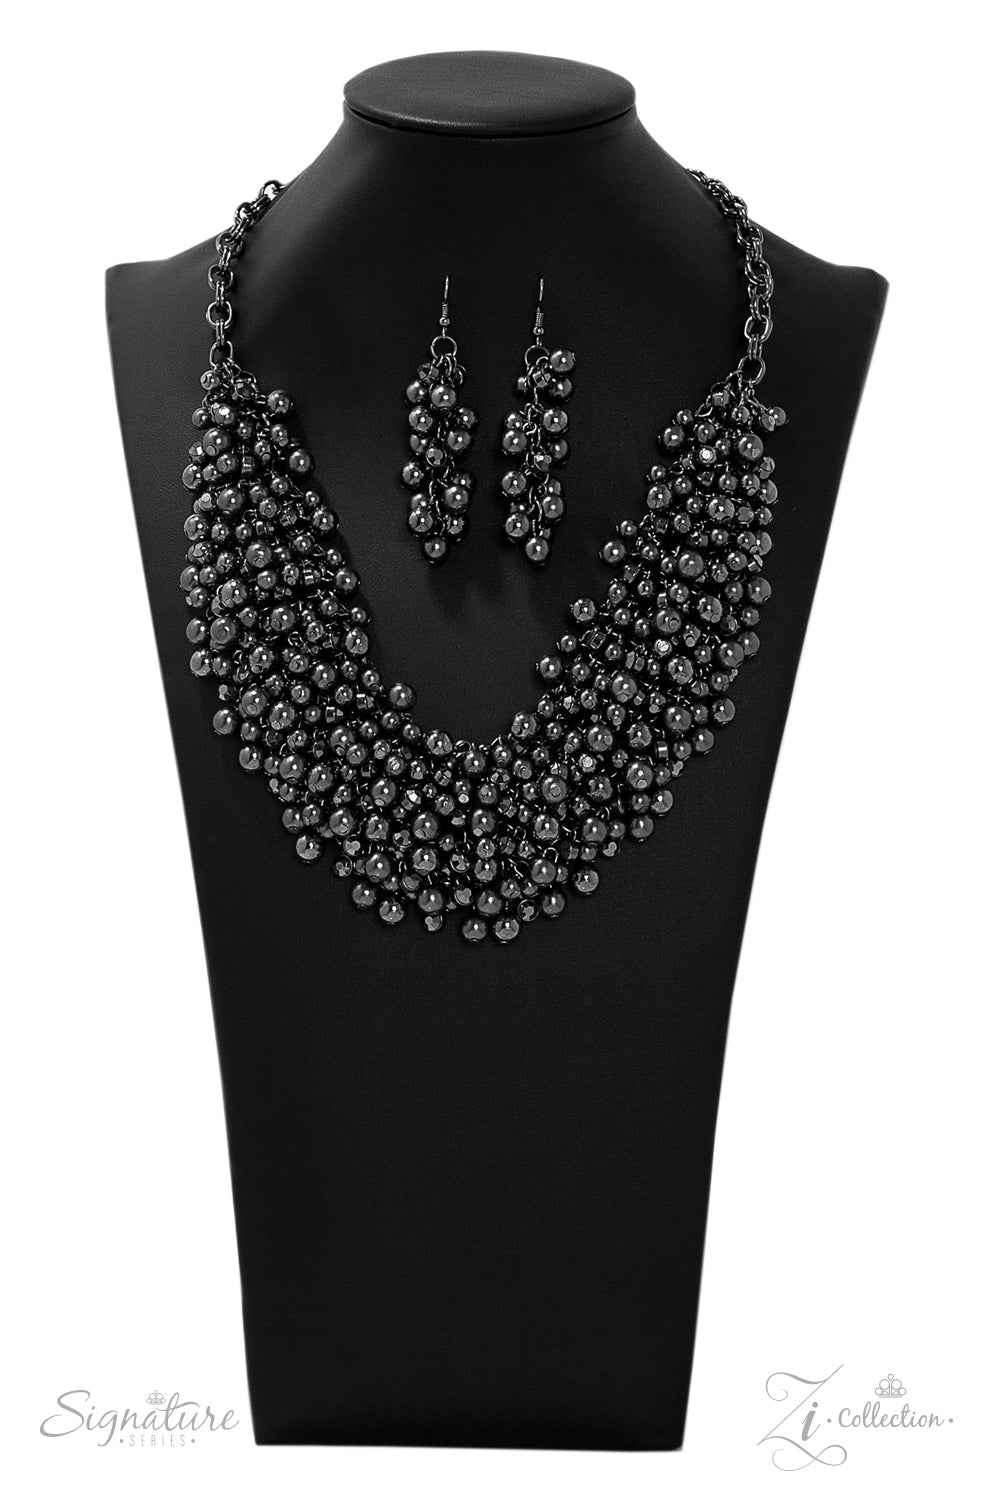 The Kellyshea Zi Collection Gunmetal Paparazzi Necklace Cashmere Pink Jewels - Cashmere Pink Jewels & Accessories, Cashmere Pink Jewels & Accessories - Paparazzi